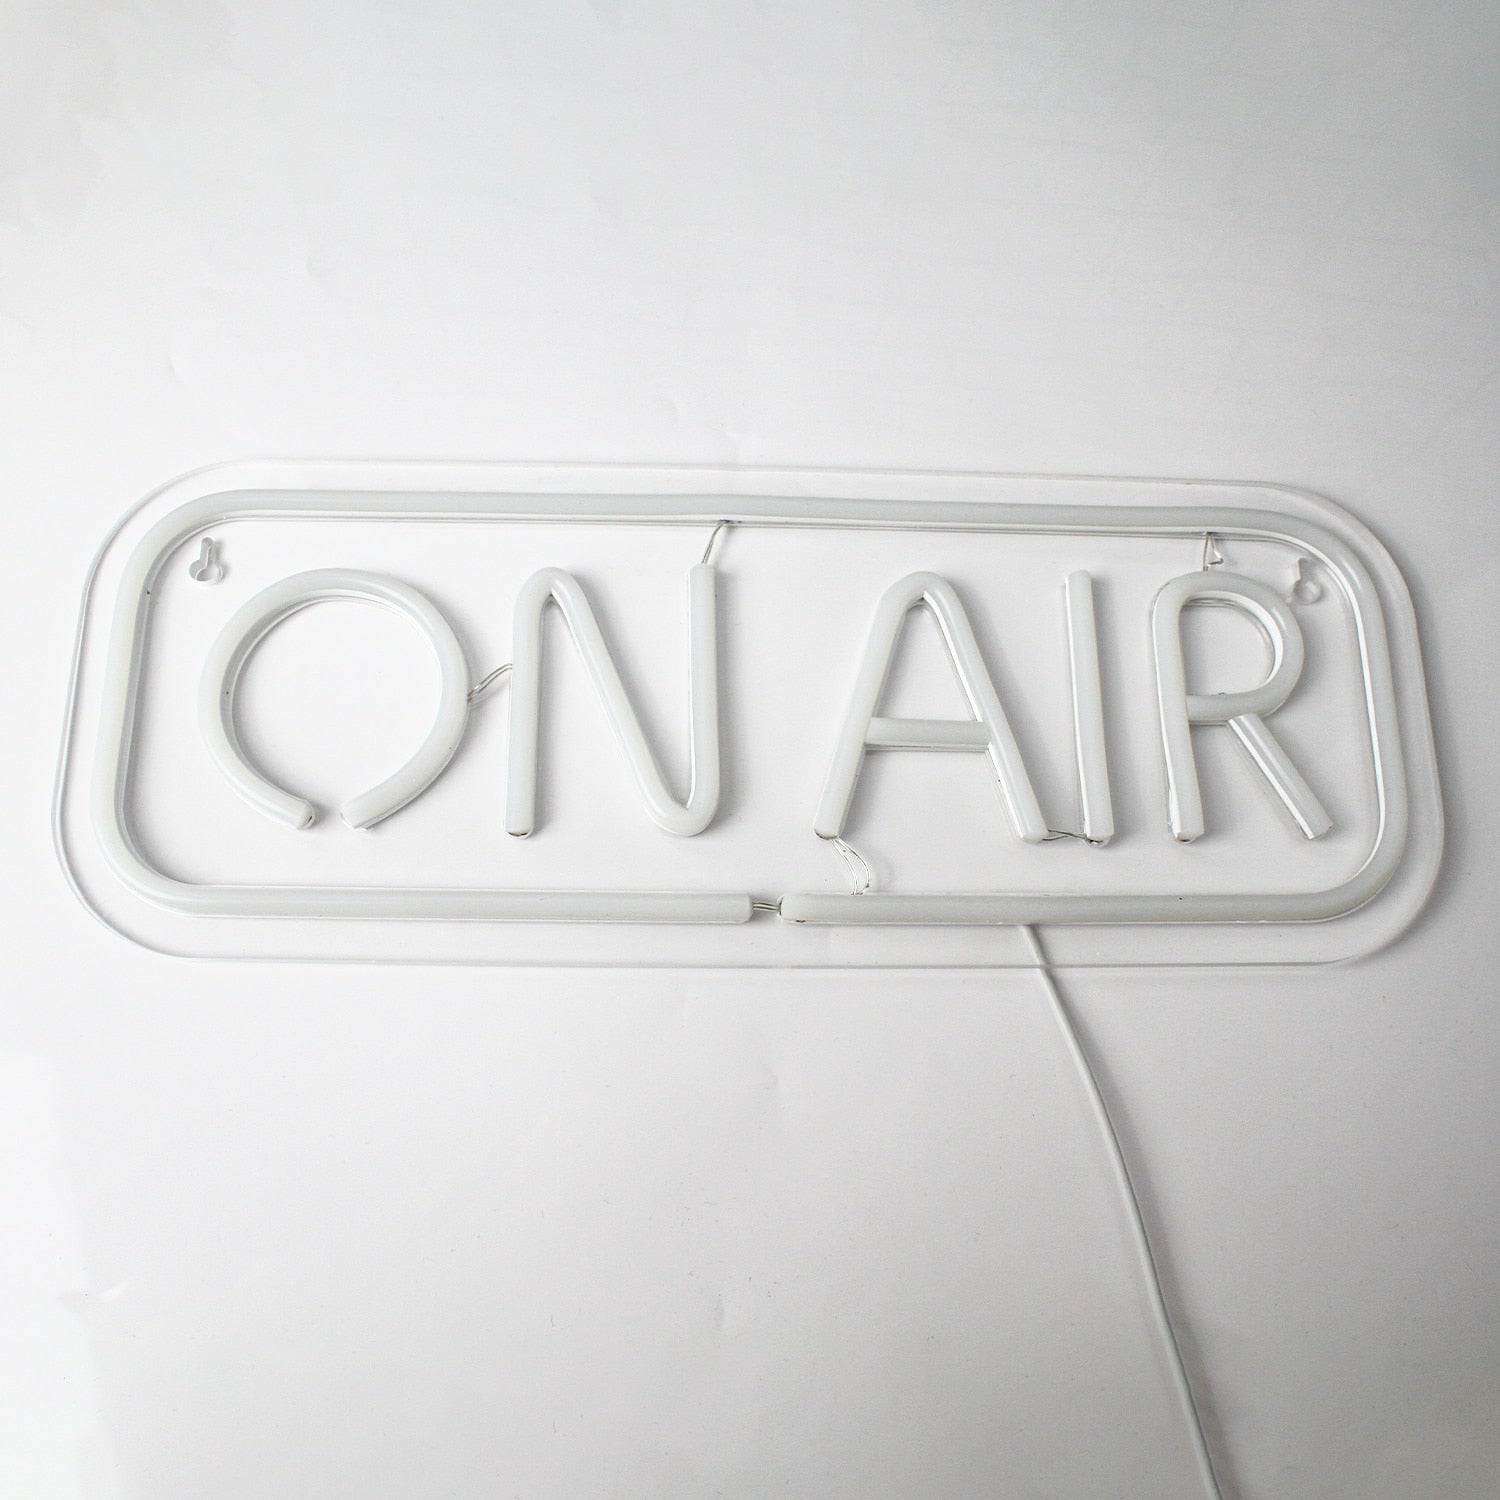 ON AIR Neon LED Sign